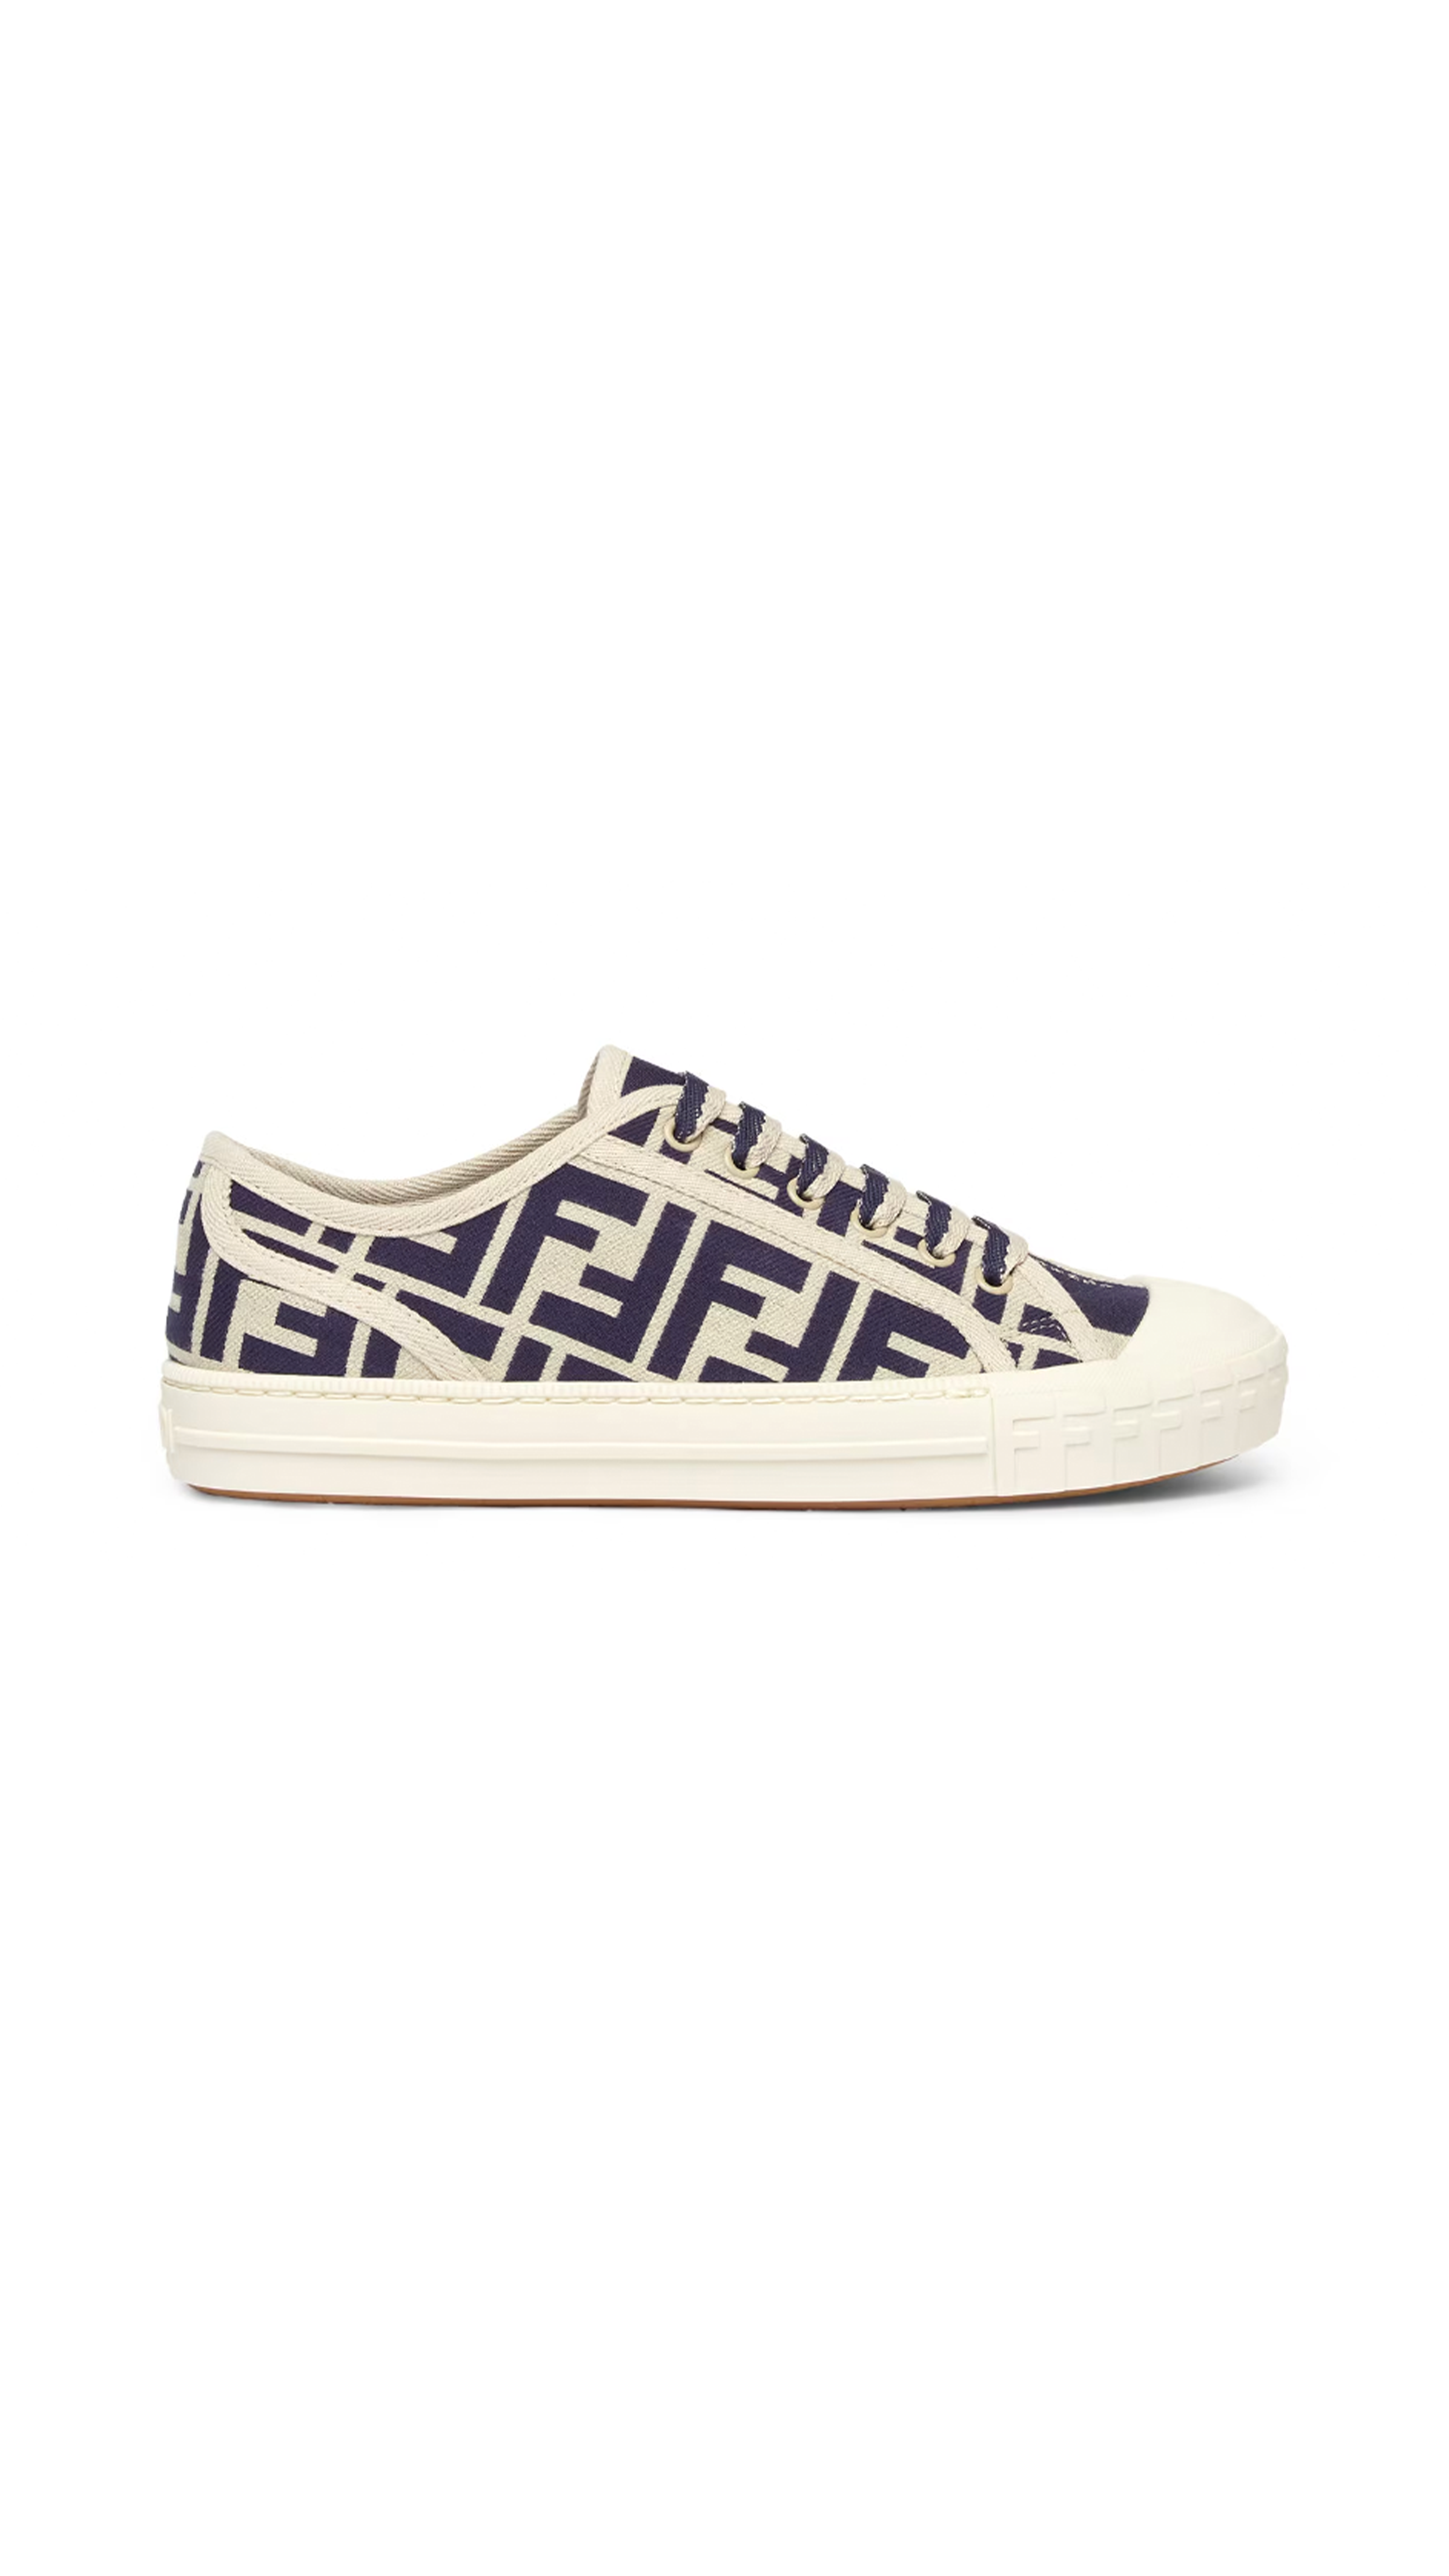 FF Canvas Domino Sneakers - White/Navy